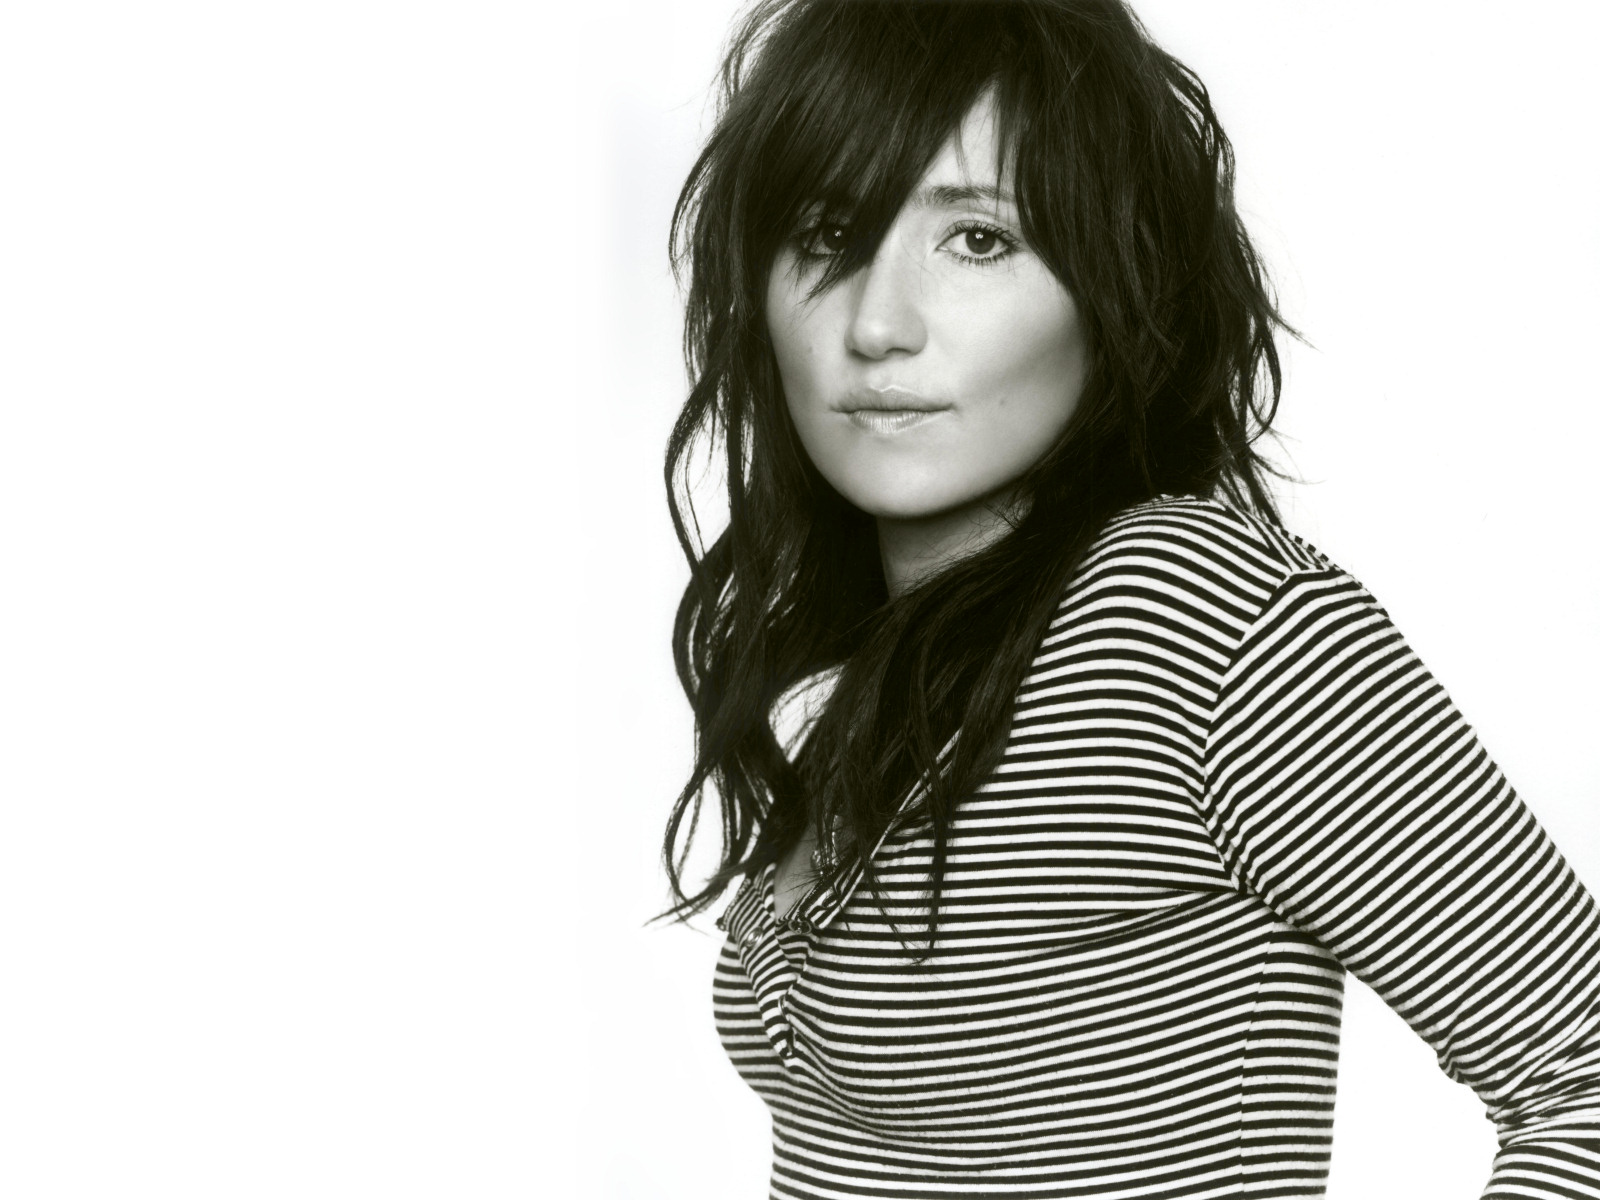 KT Tunstall Backgrounds, Compatible - PC, Mobile, Gadgets| 1600x1200 px